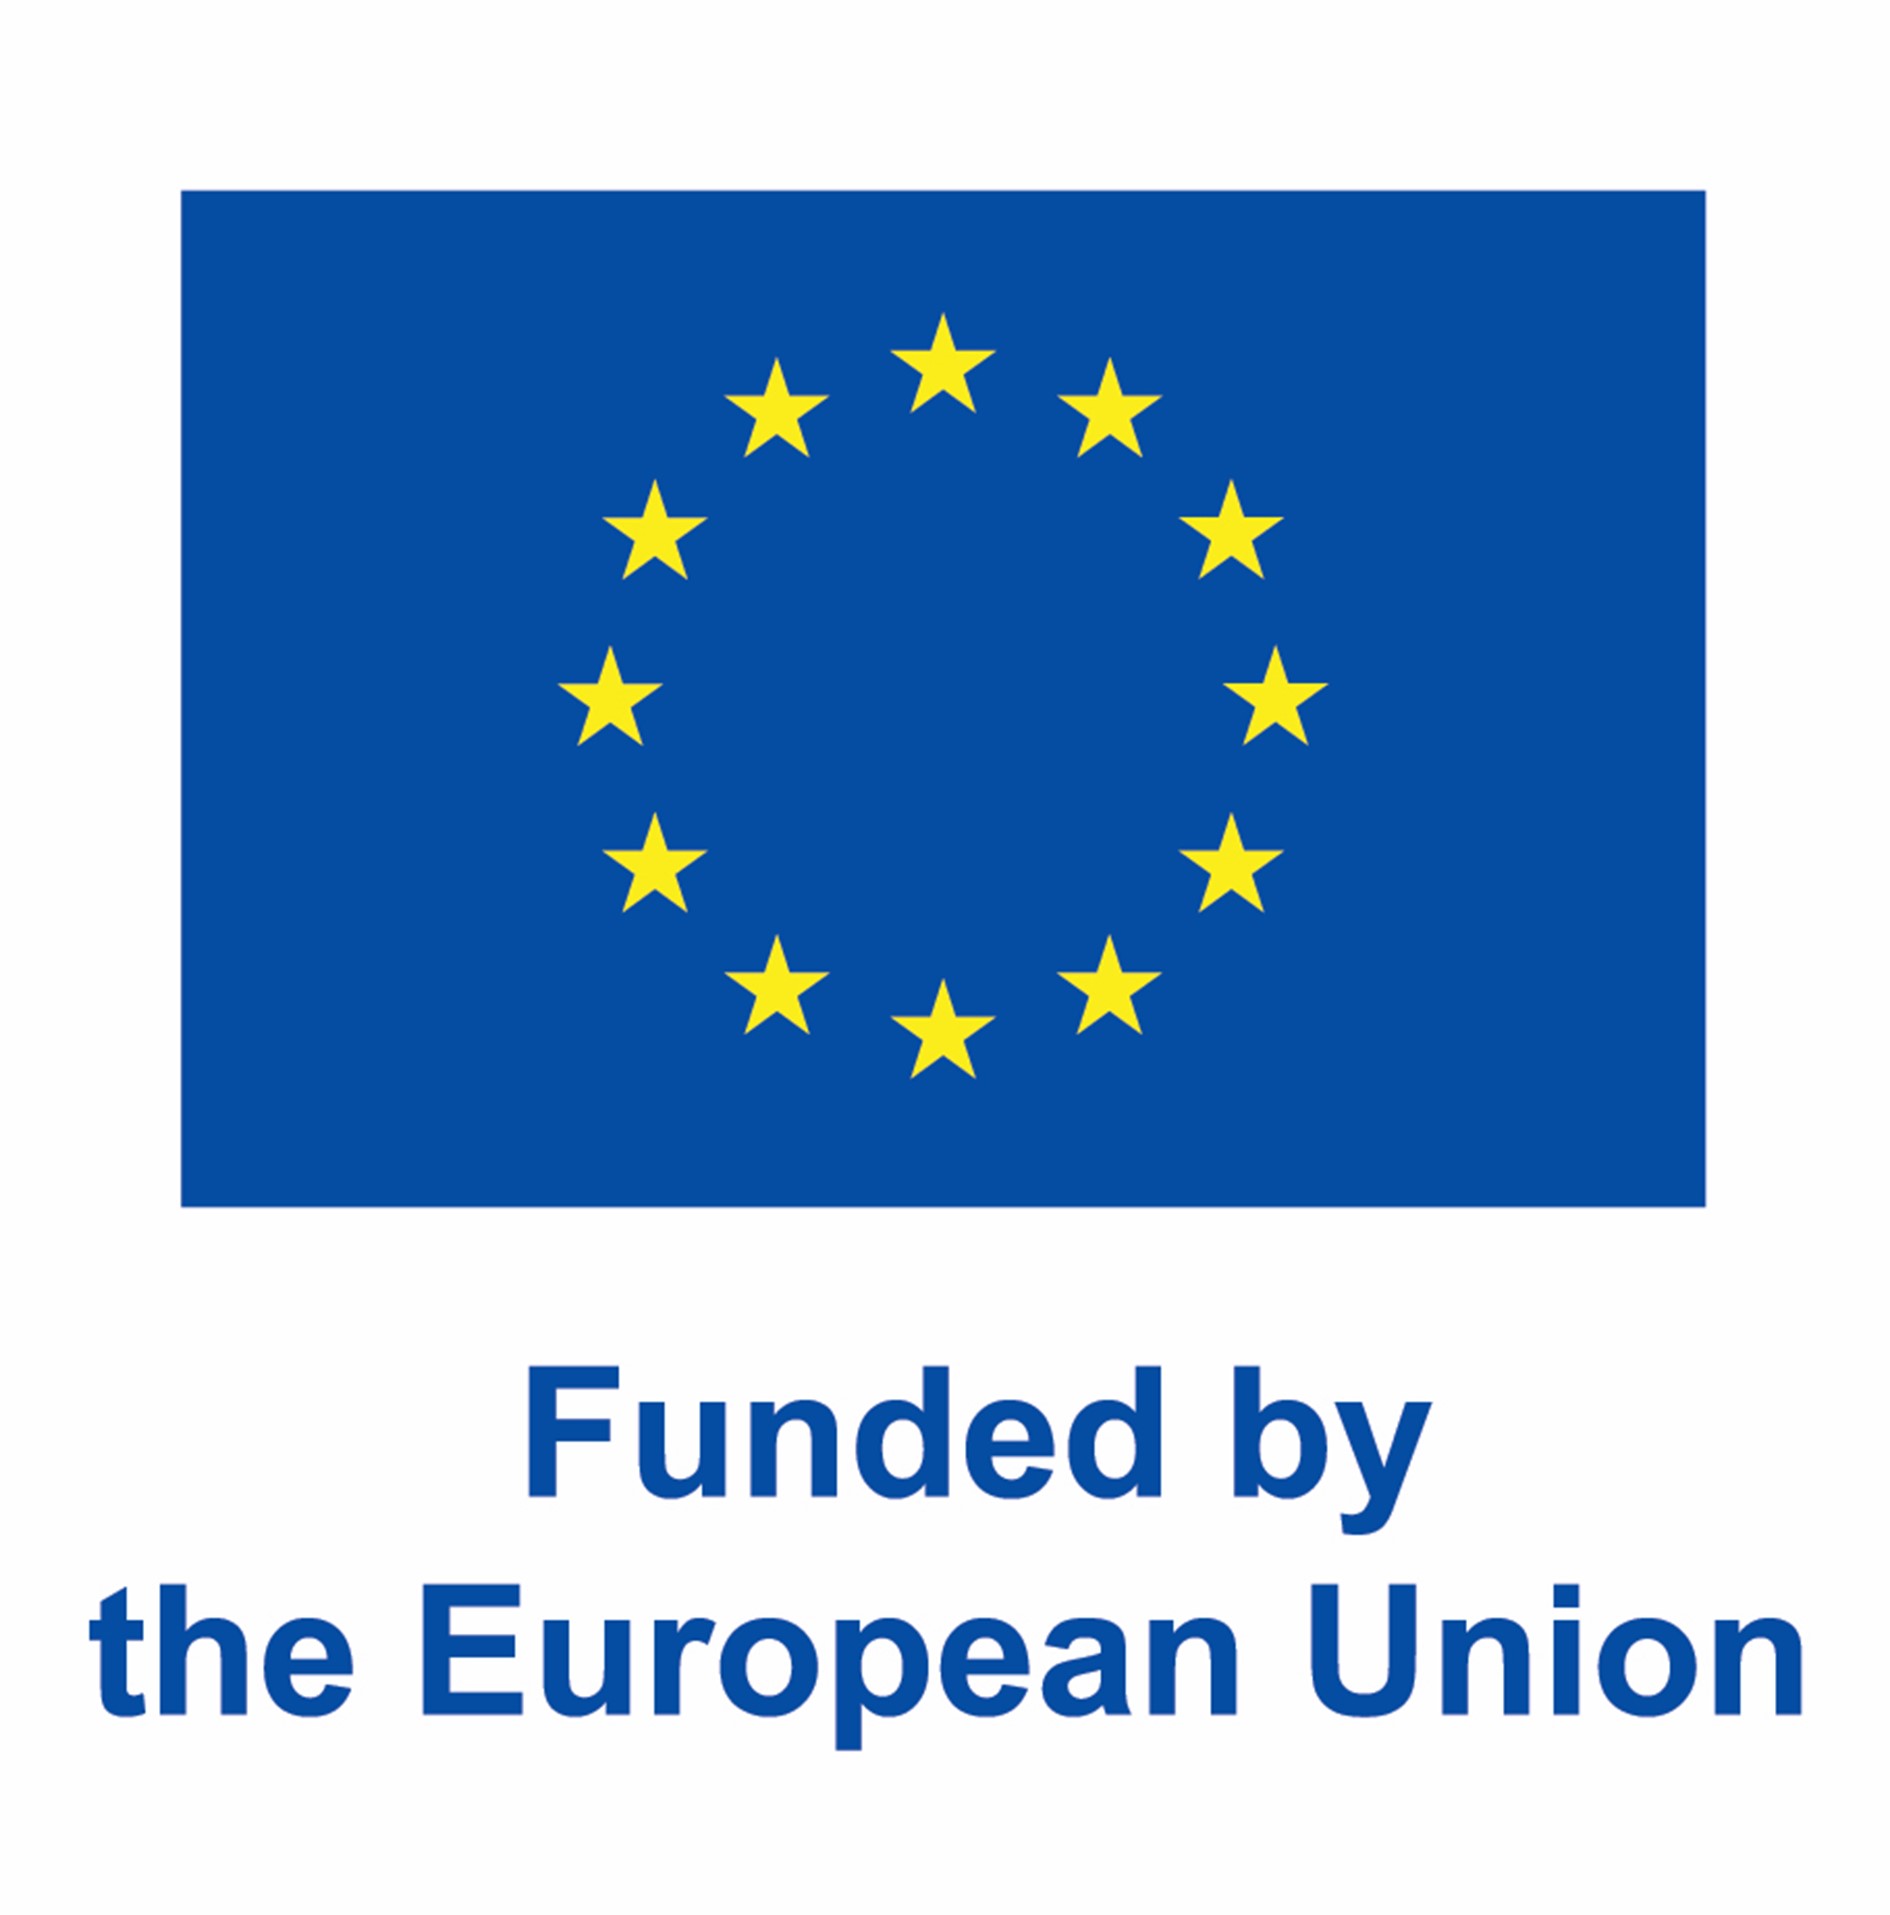 Sense_project_Funded_by_the_european_union.jpg